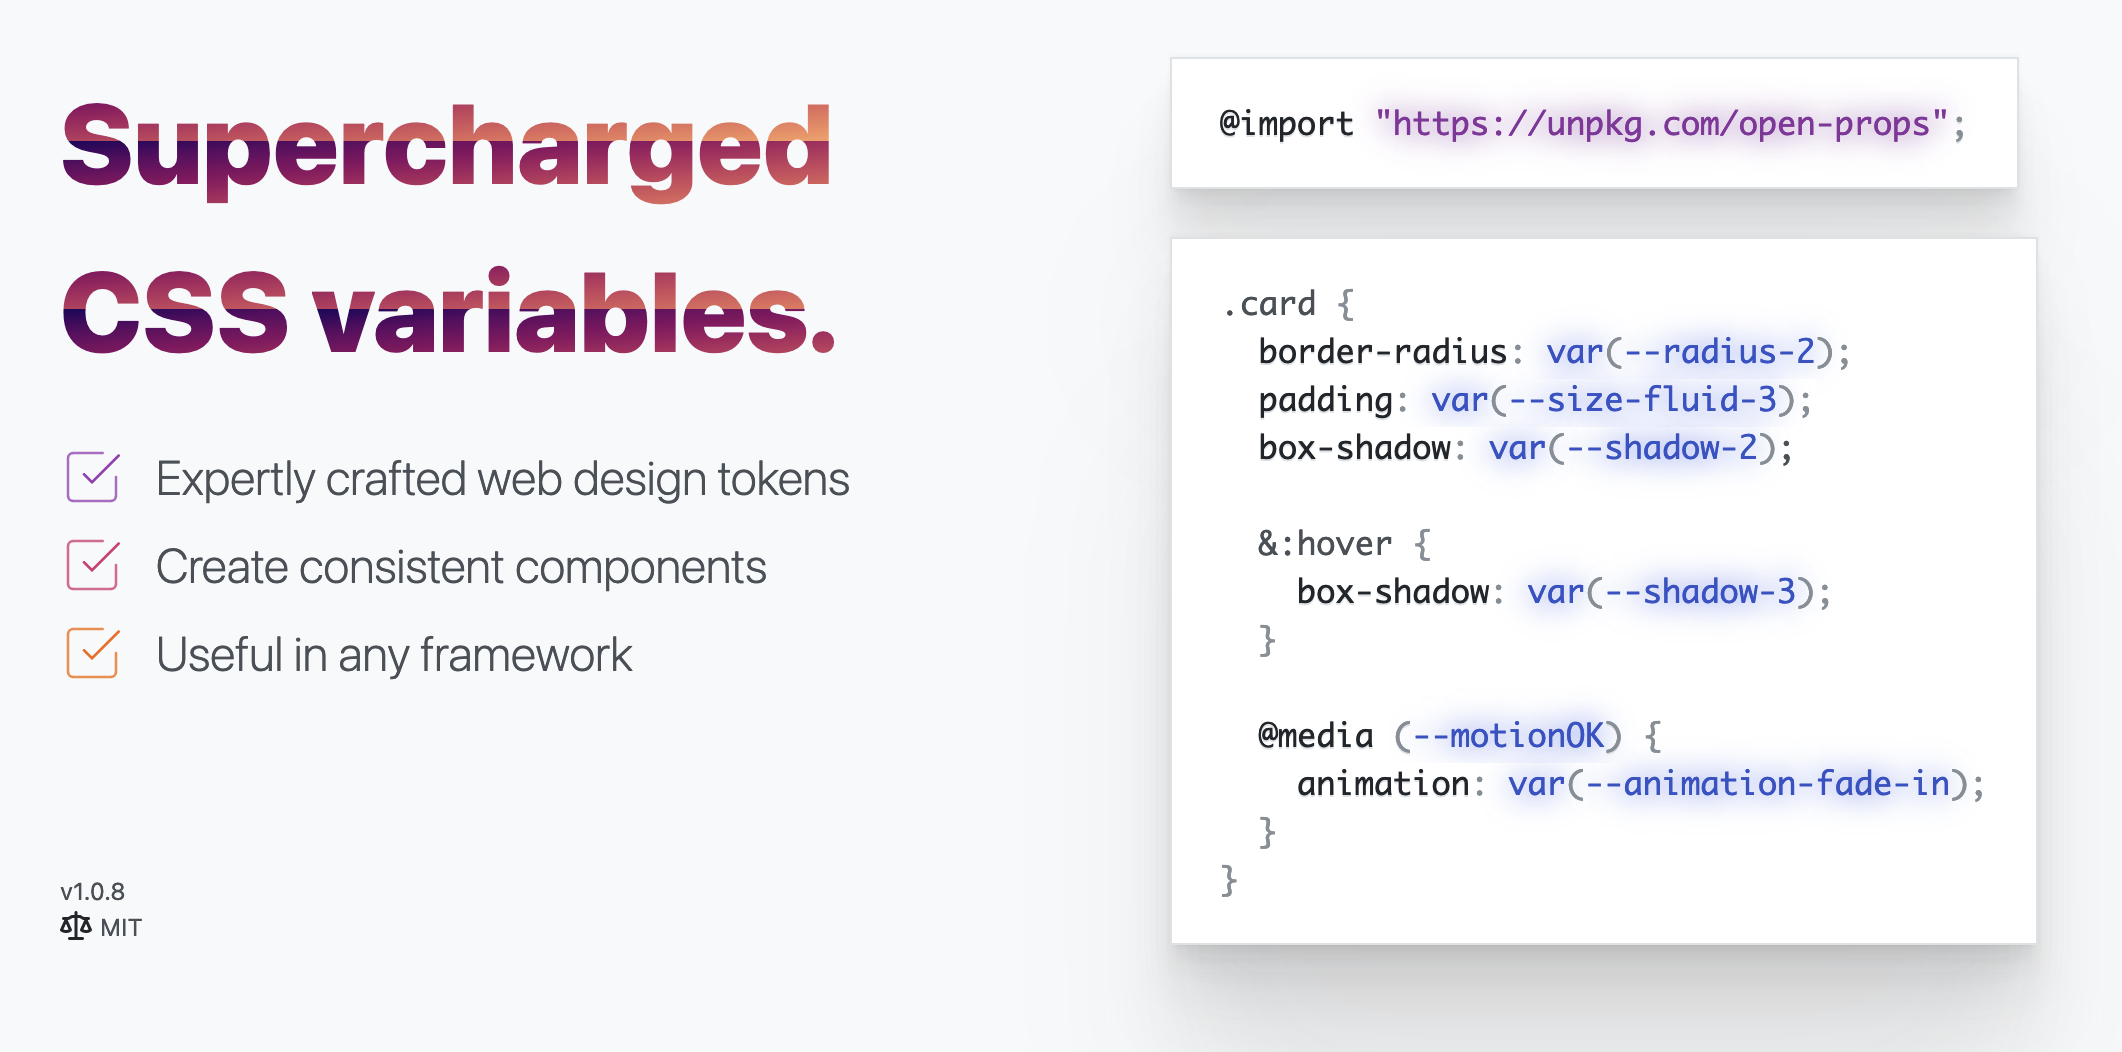 Supercharged CSS variables: Expertly crafted web design tokens, Create consistent components and useful in any framework